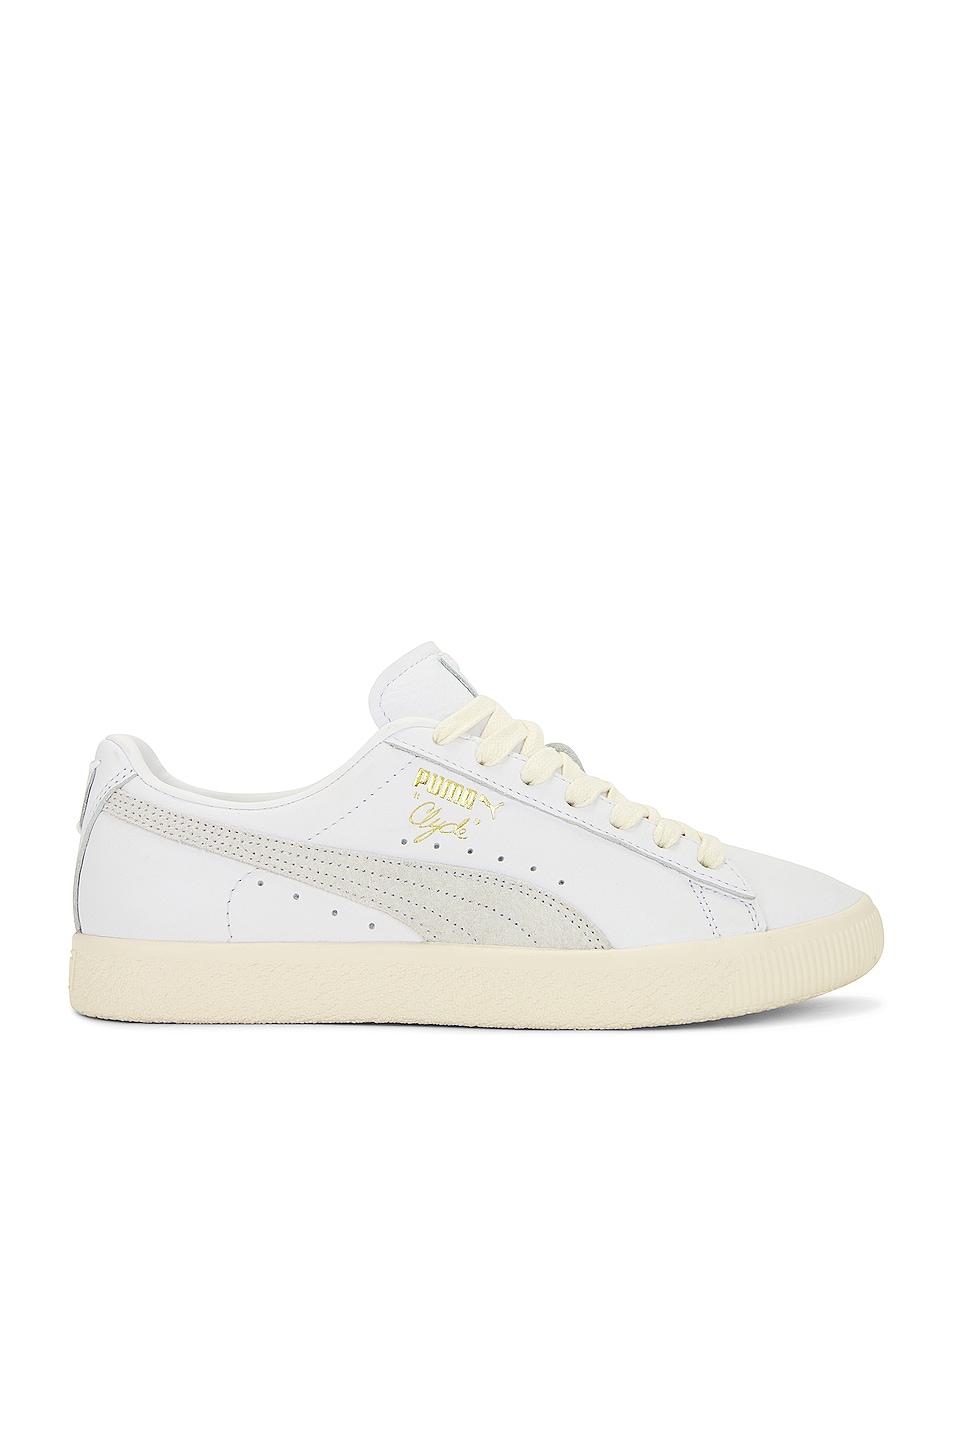 Clyde Base Sneakers in White